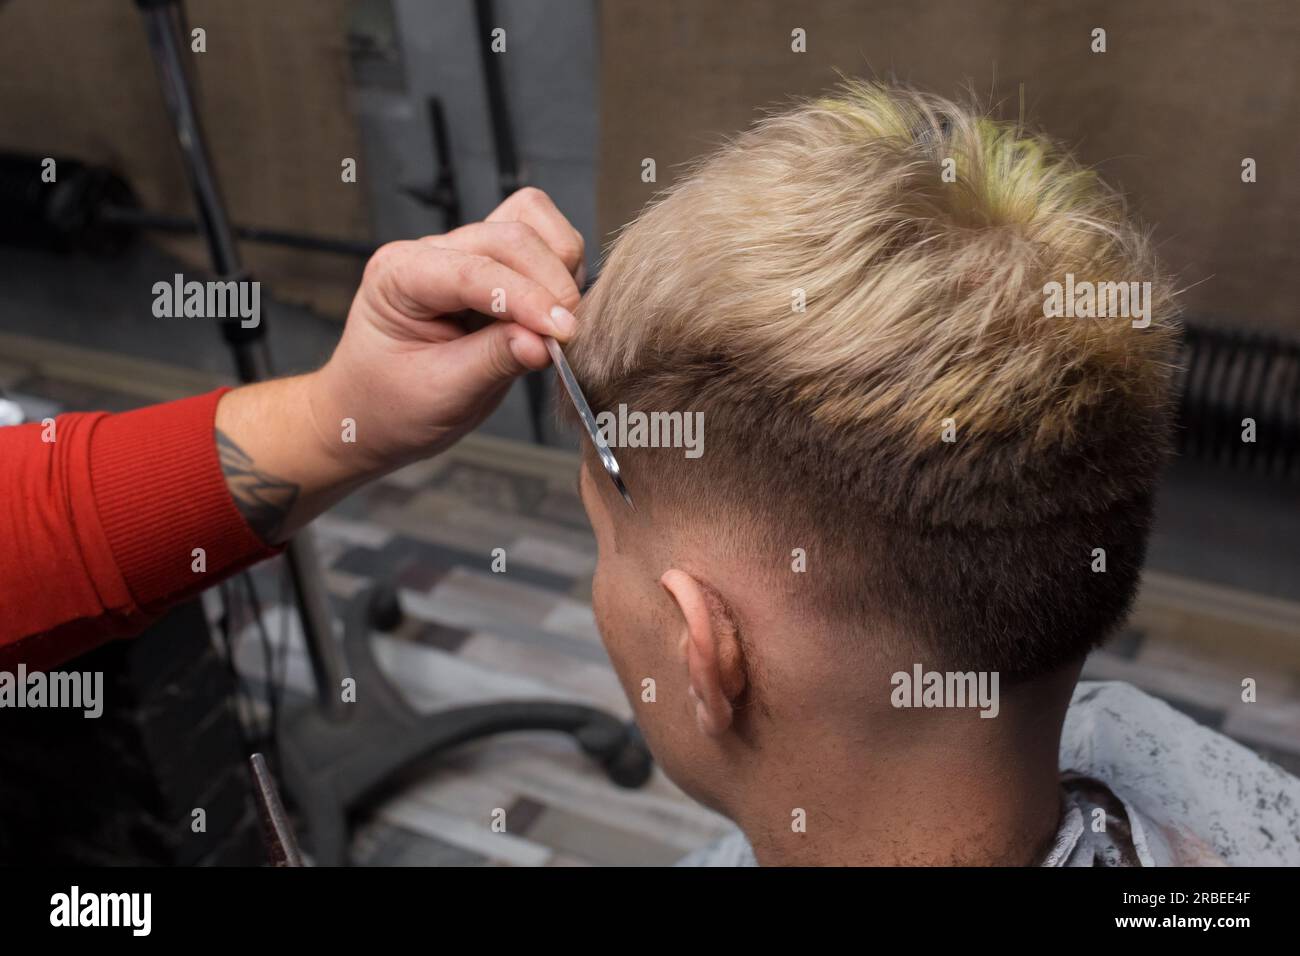 The hand of a male salon worker combs a client's hair during a haircut at work in a hairdresser. Stock Photo